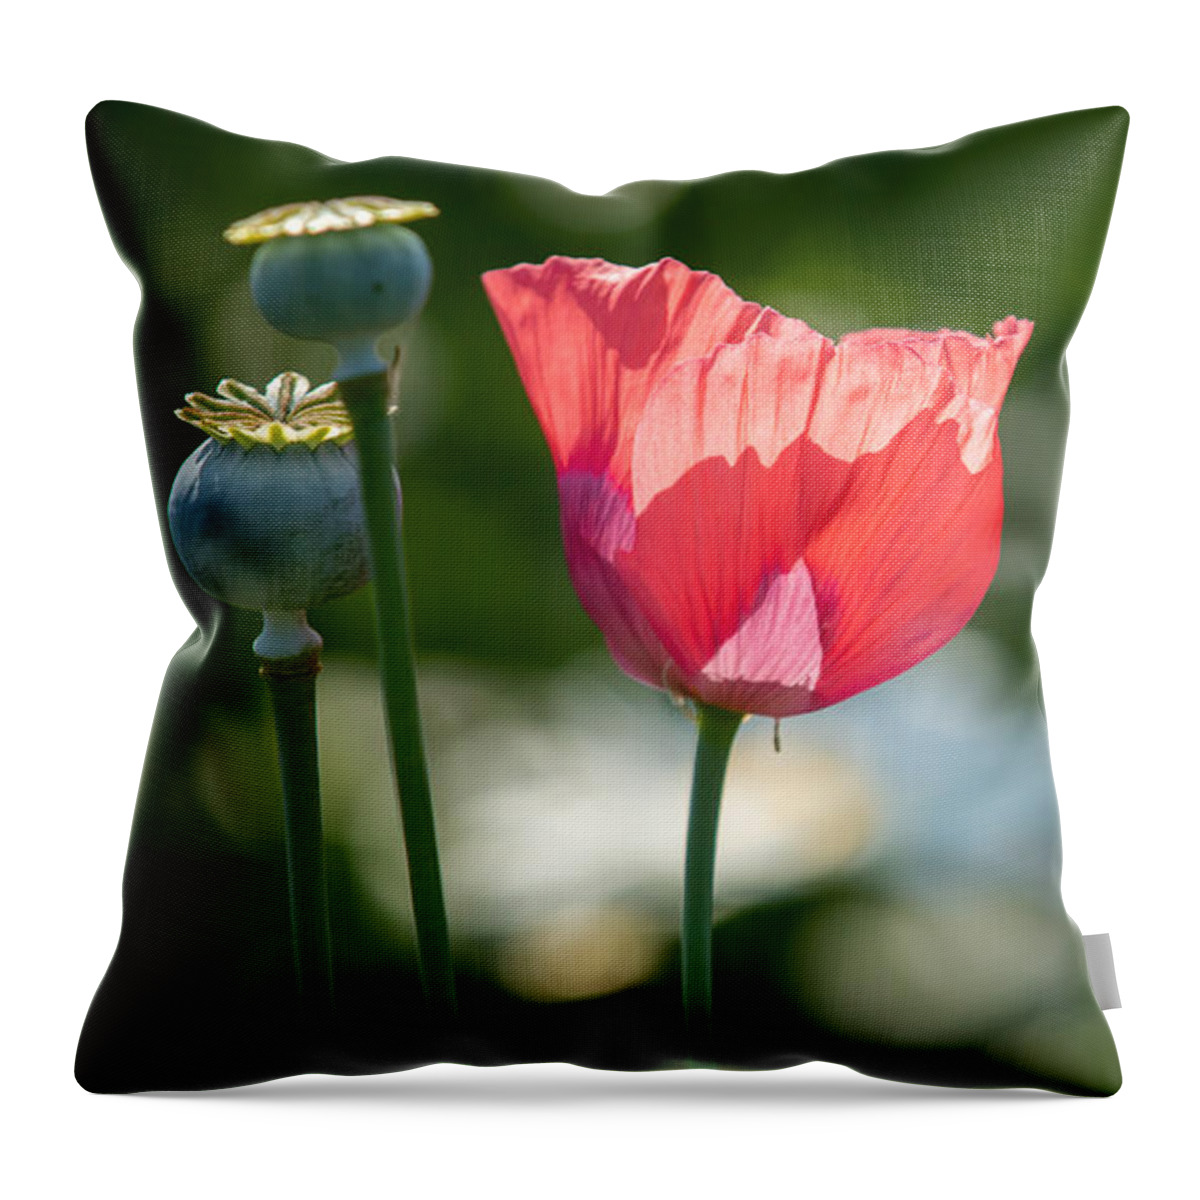 Poppies Throw Pillow featuring the photograph Poppies by Holly Ross